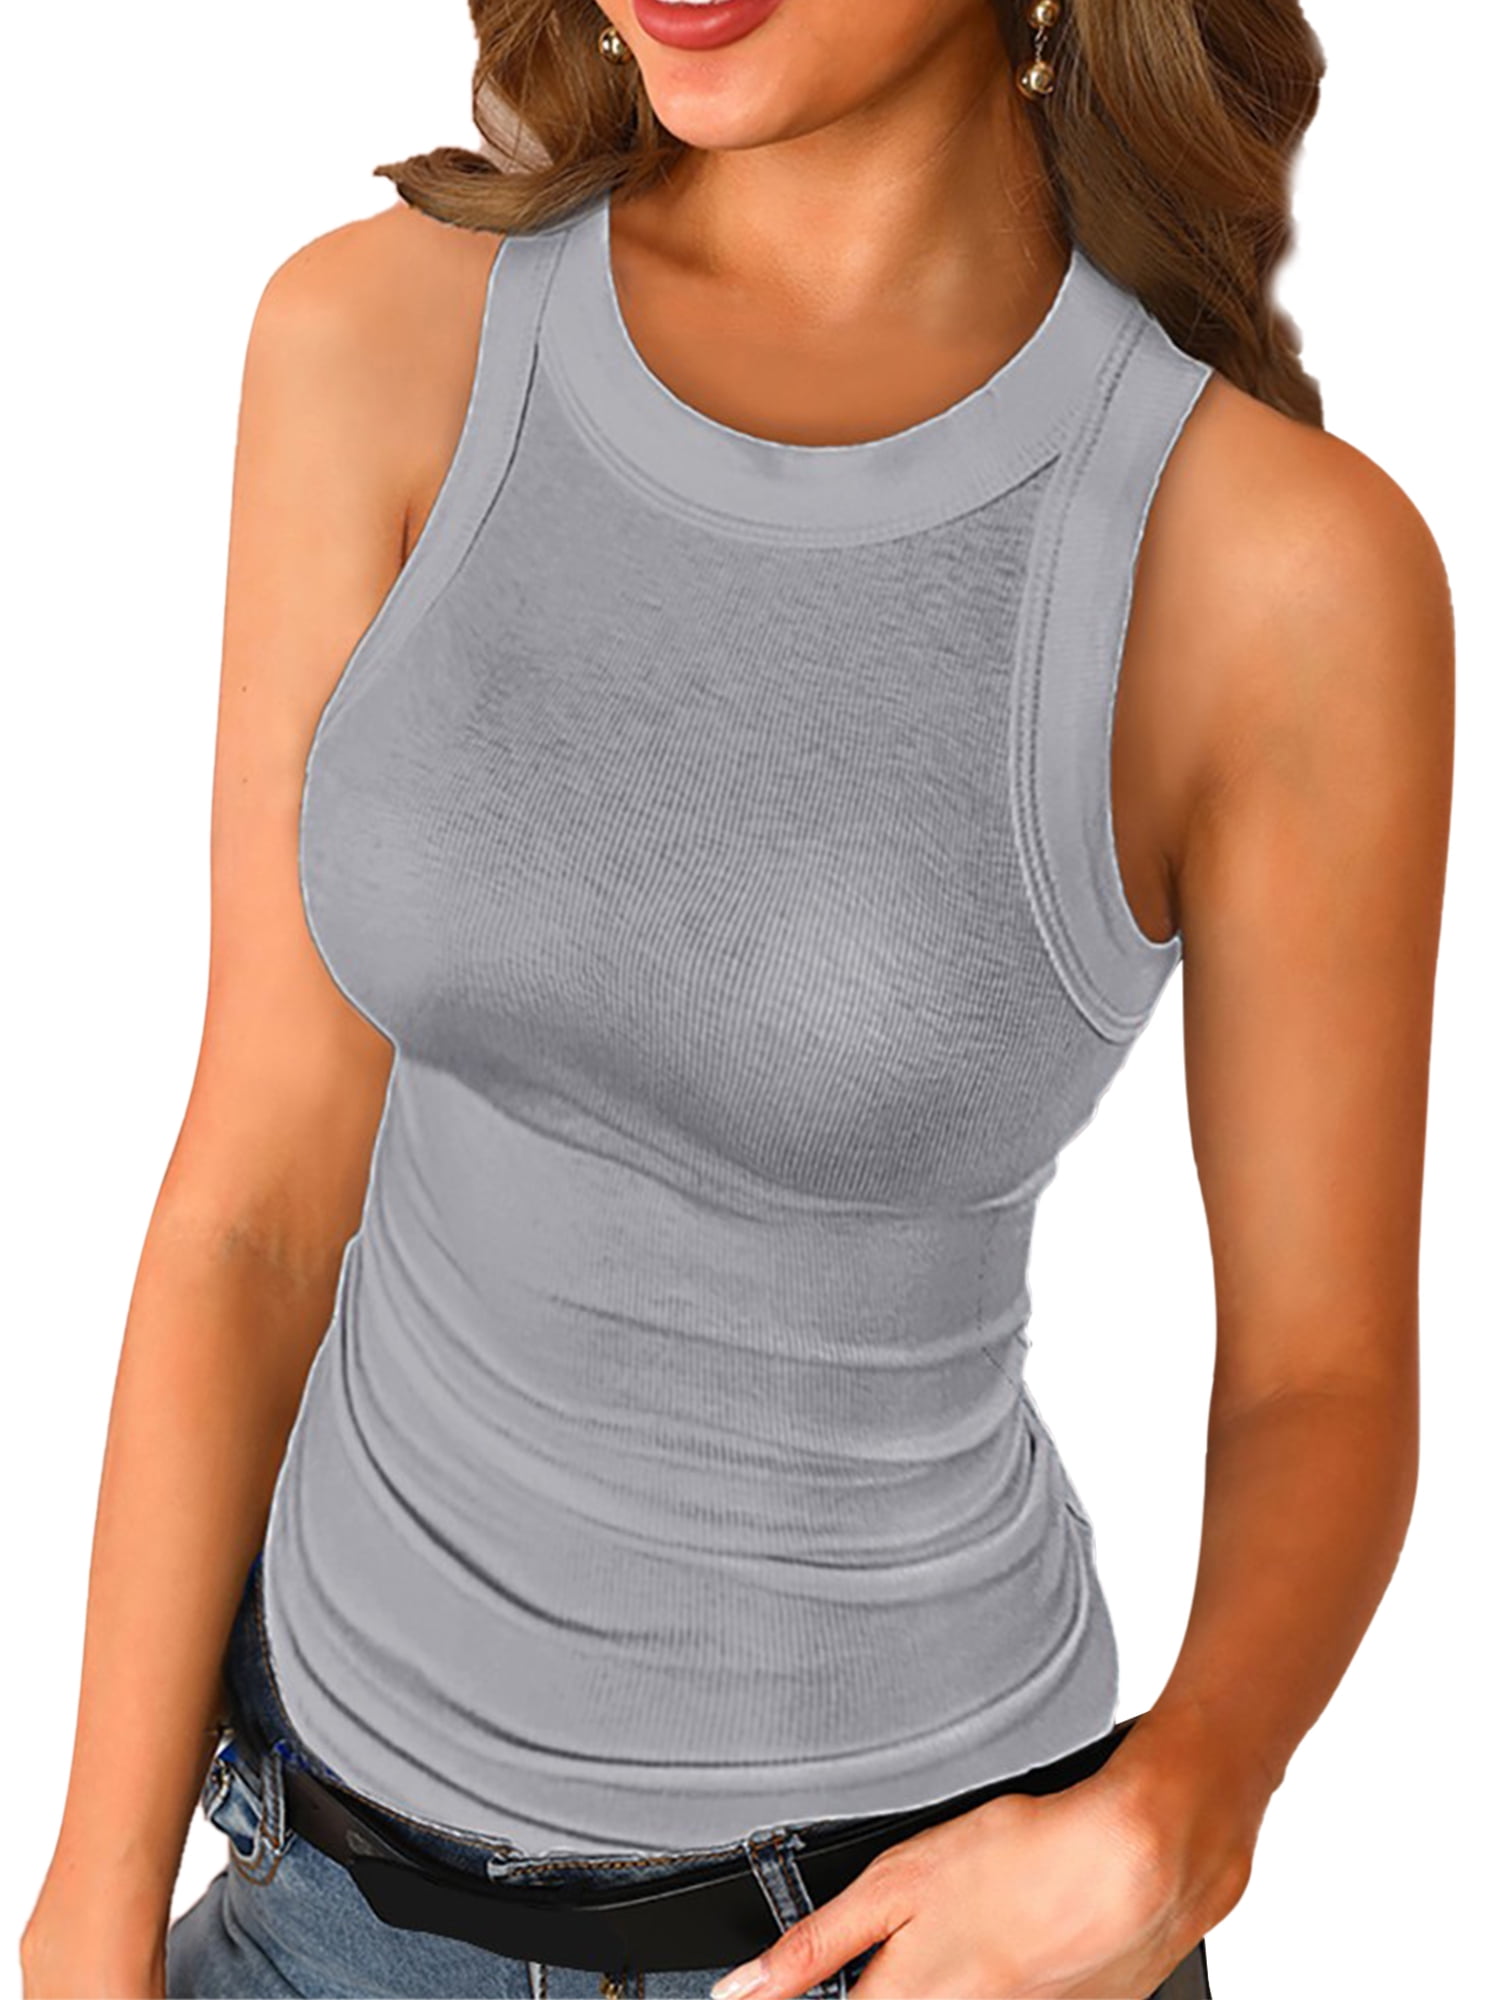 Women Workout Tank Top Sleevelss Ribbed Stretch Yoga Top Tthletic